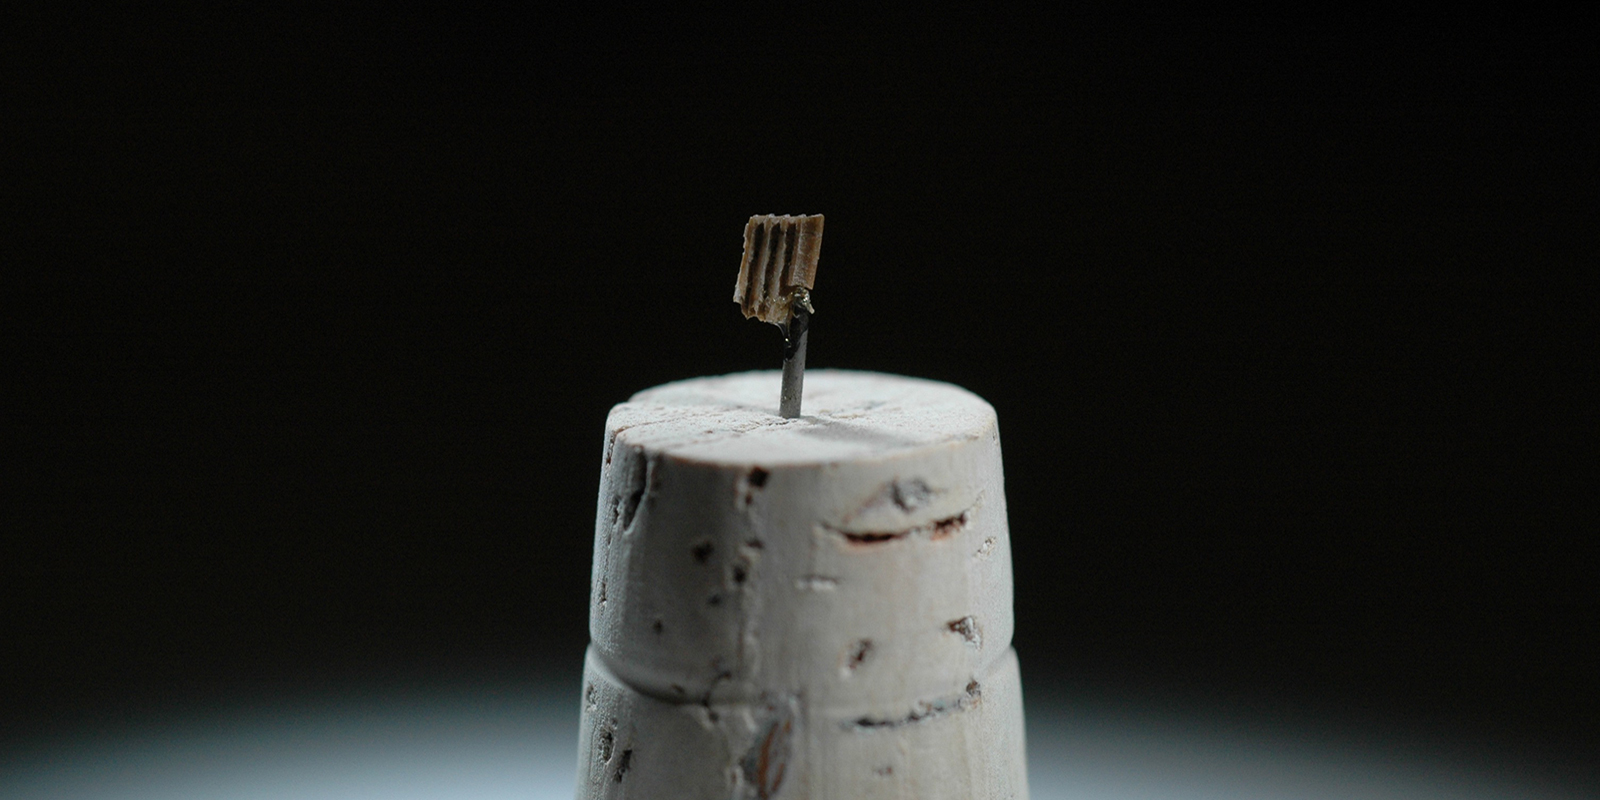 A tiny square-shaped tooth is mounted on a small piece of cork